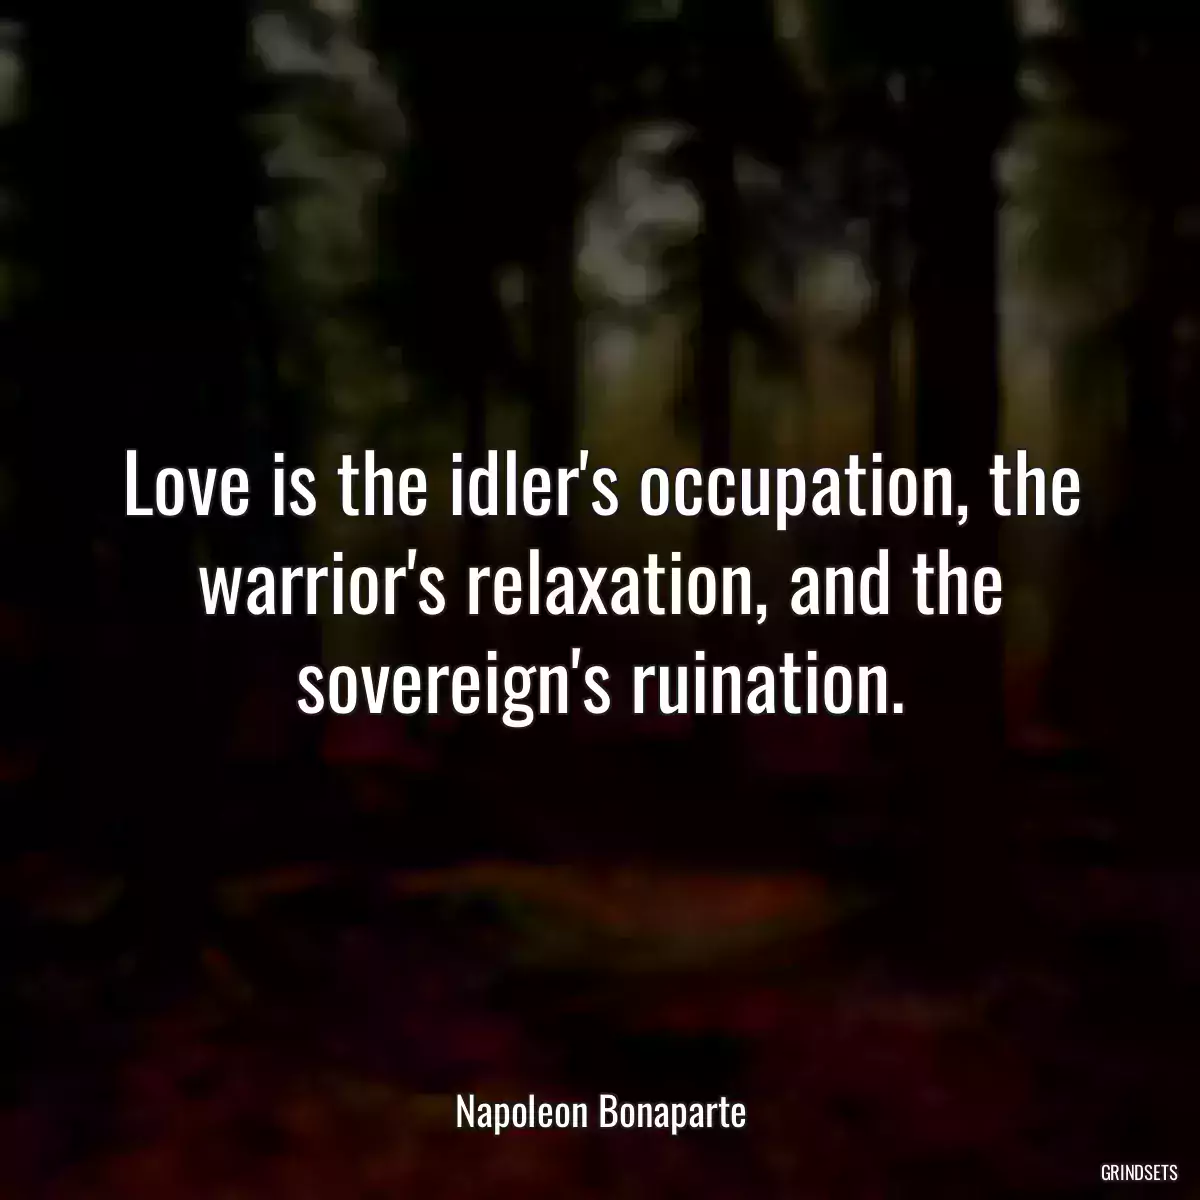 Love is the idler\'s occupation, the warrior\'s relaxation, and the sovereign\'s ruination.